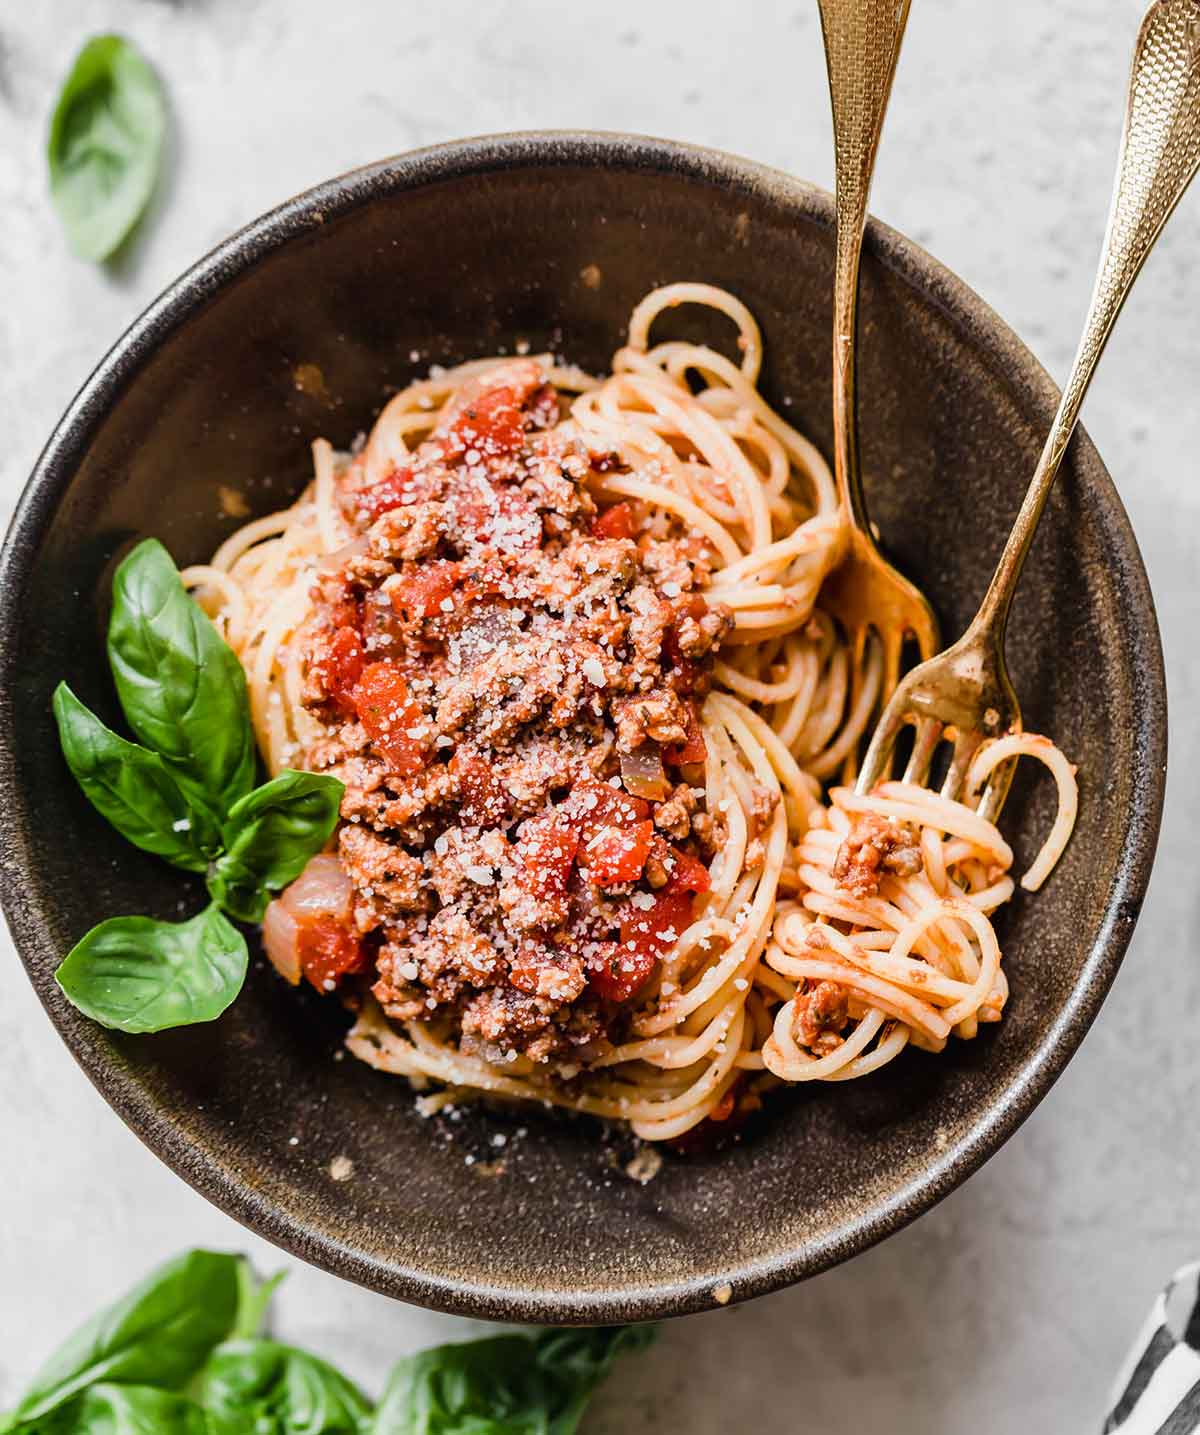 A bowl of spaghetti with meat sauce and two forks and a sprig of fresh basil in the bowl.